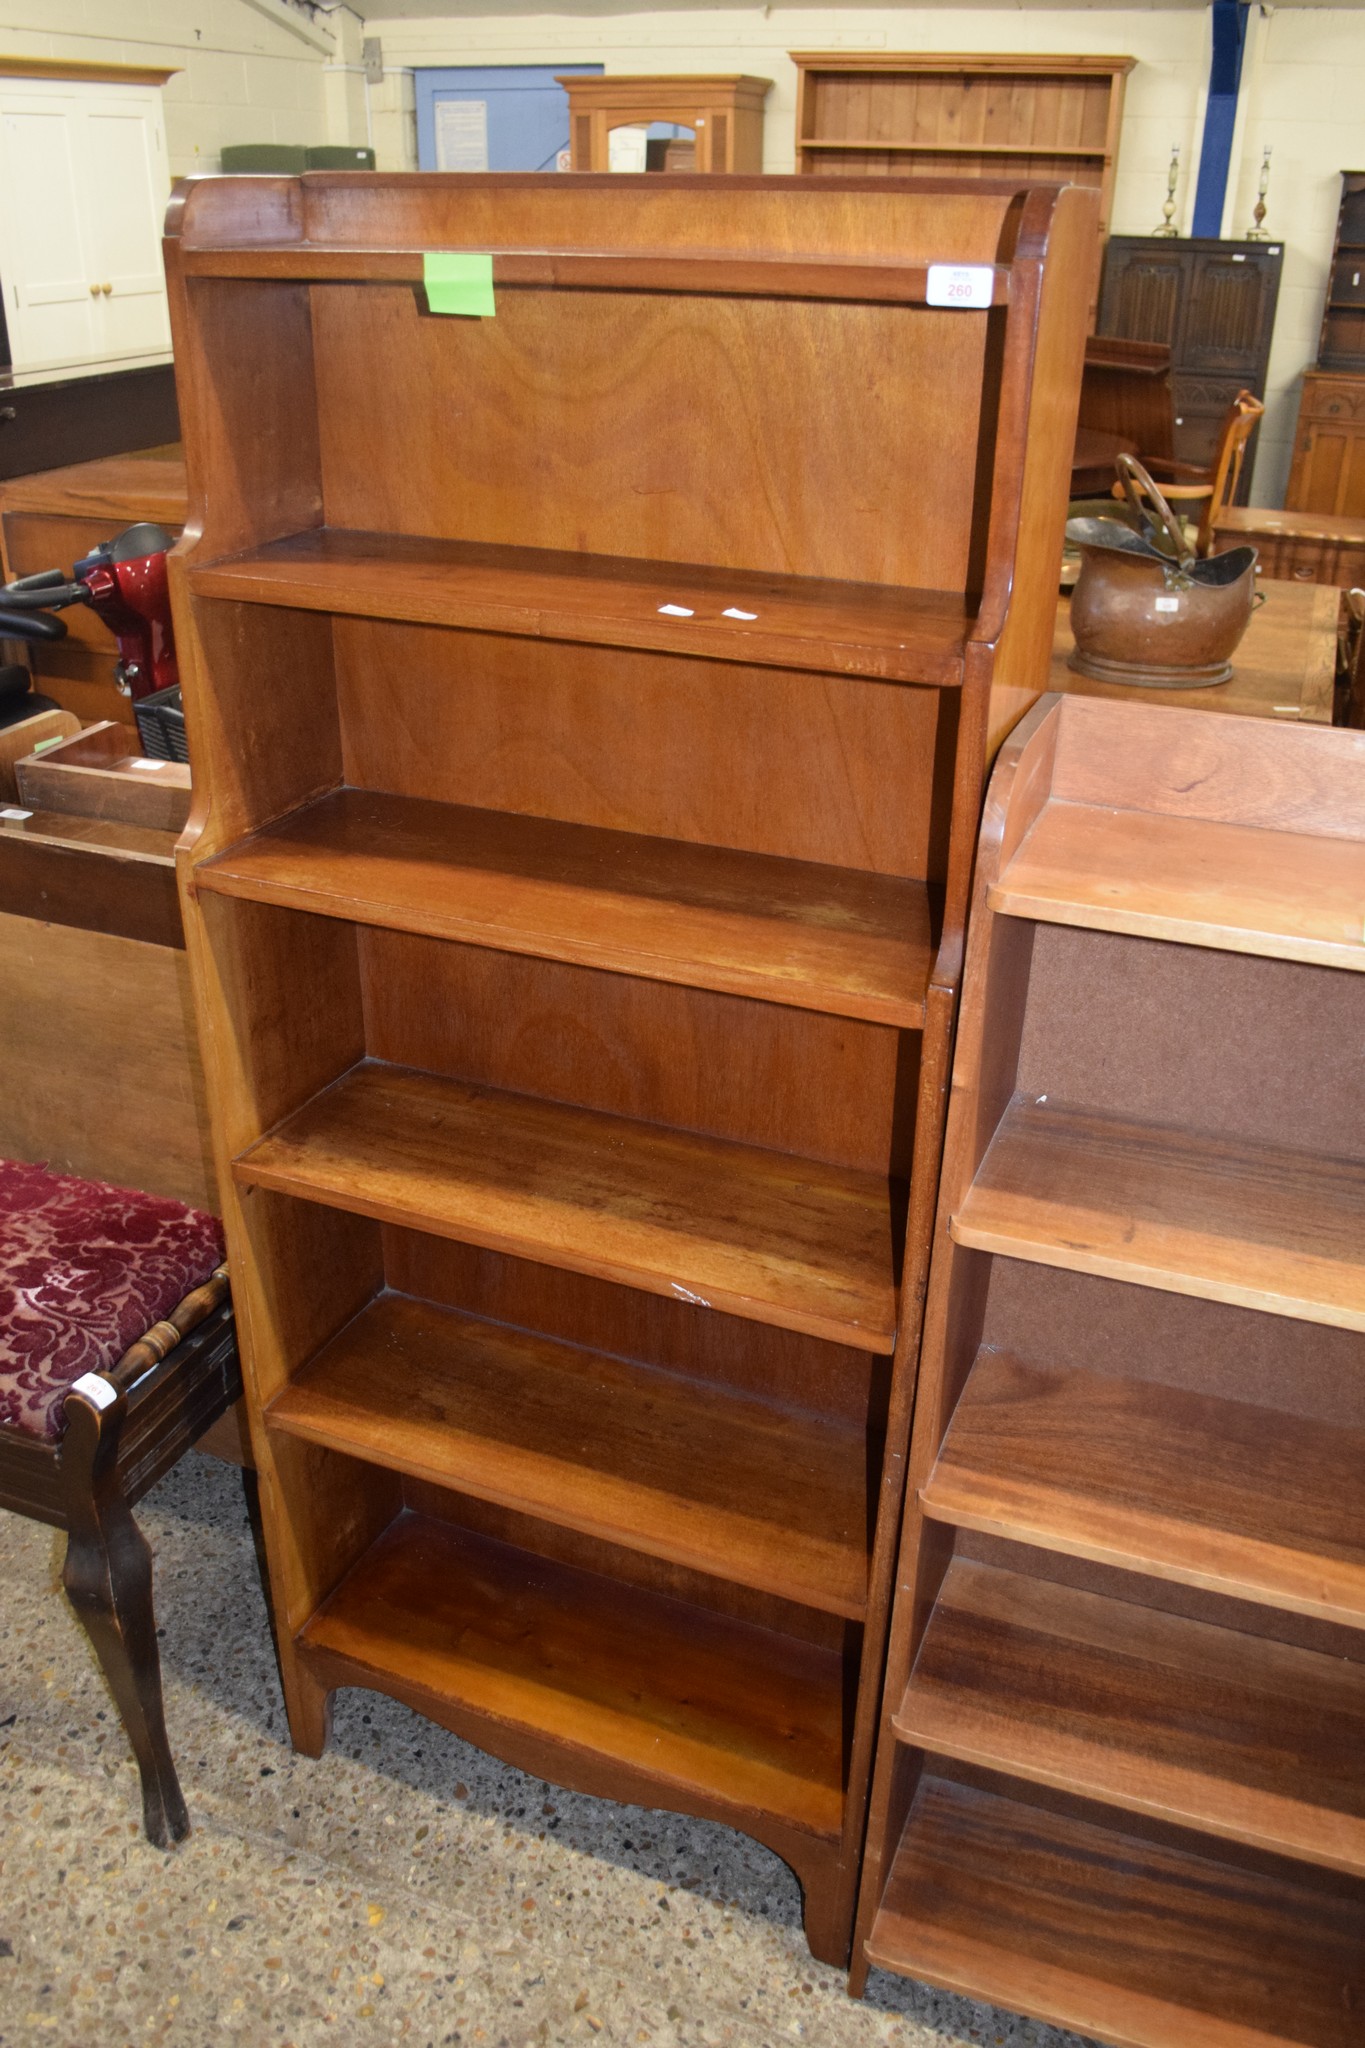 MAHOGANY “WATERFALL” TYPE BOOKCASE, 63CM WIDE